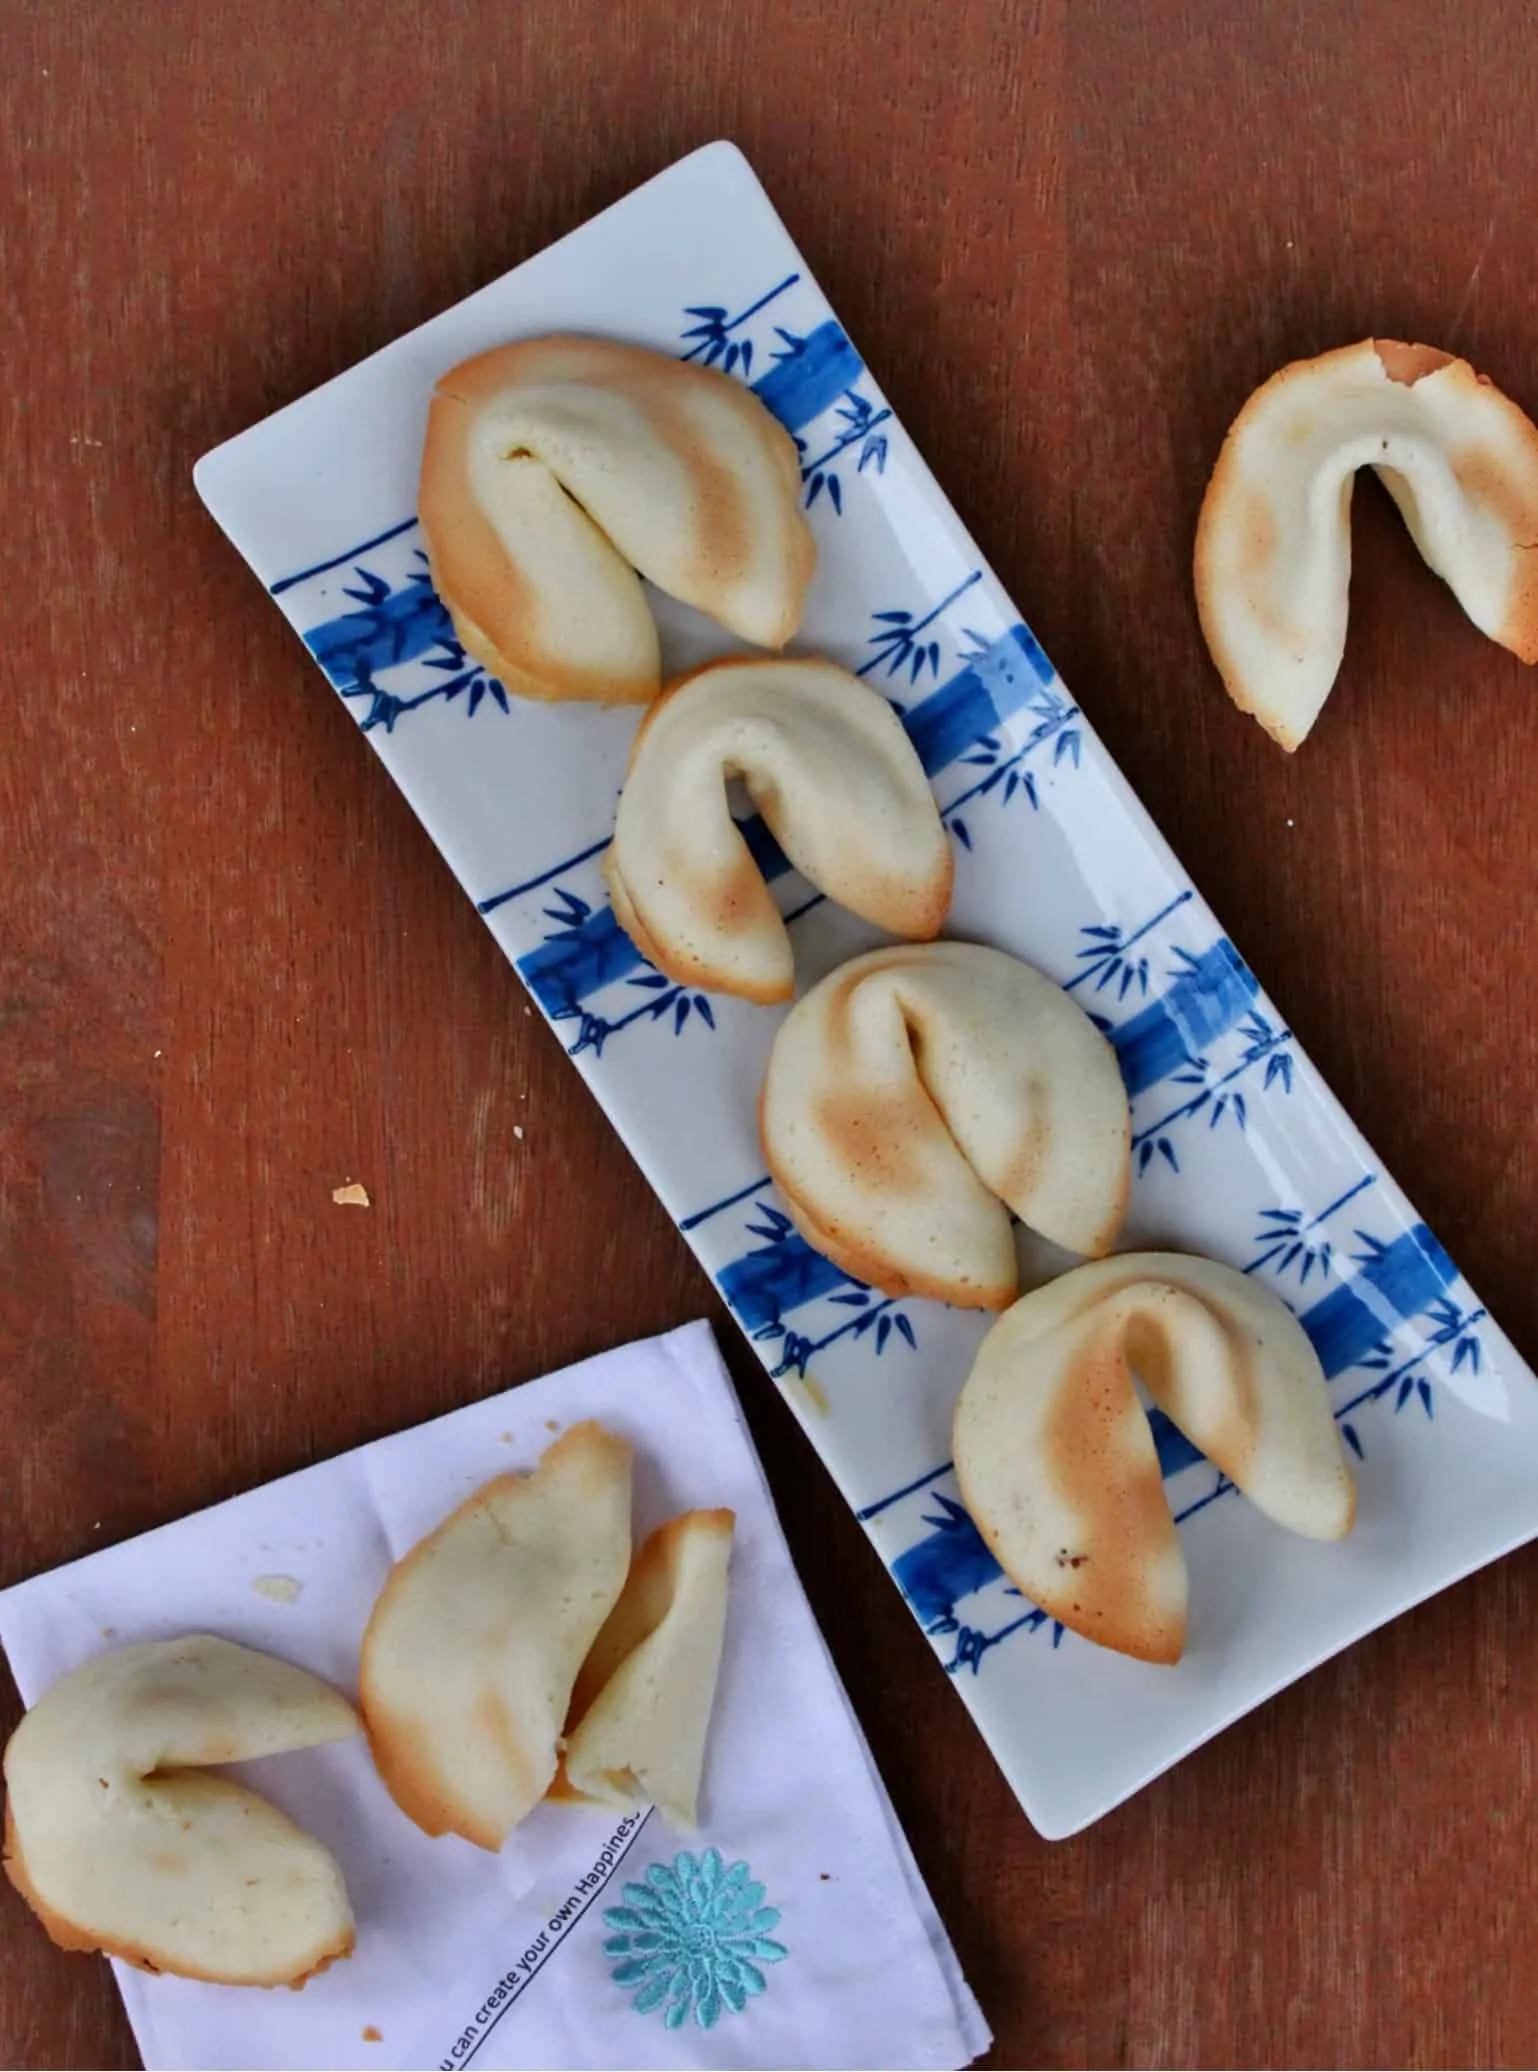 Homemade Fortune Cookies in a tray and some on a napkin